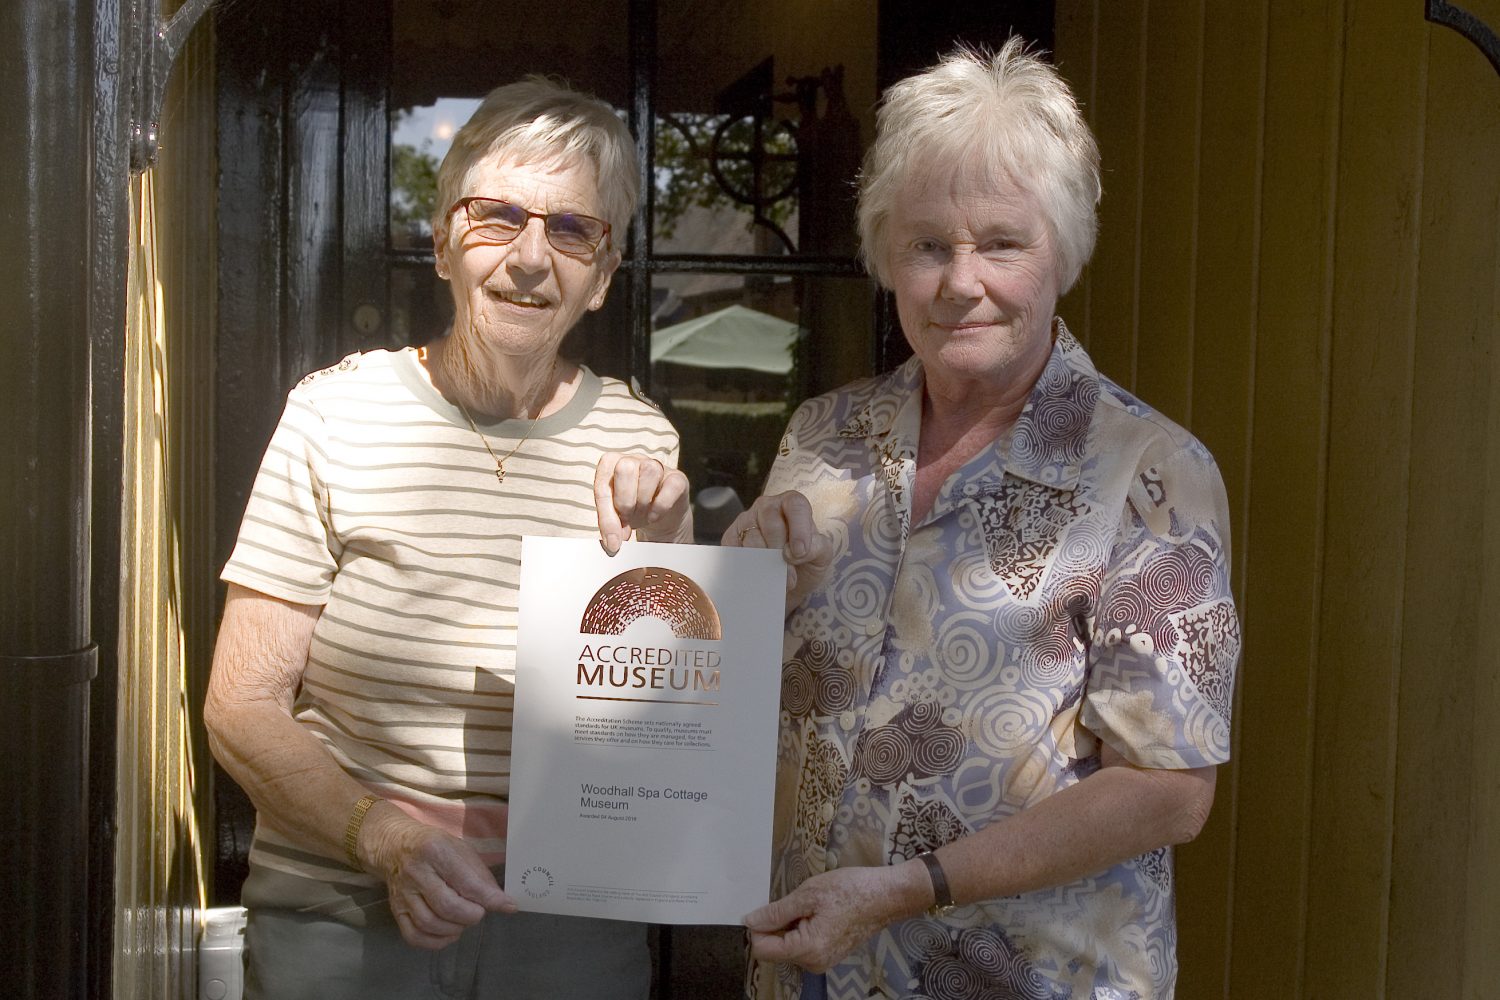 Our chaiman Gill Noble with deputy chairman Patricia Duke-Cox and the accreditation certificate